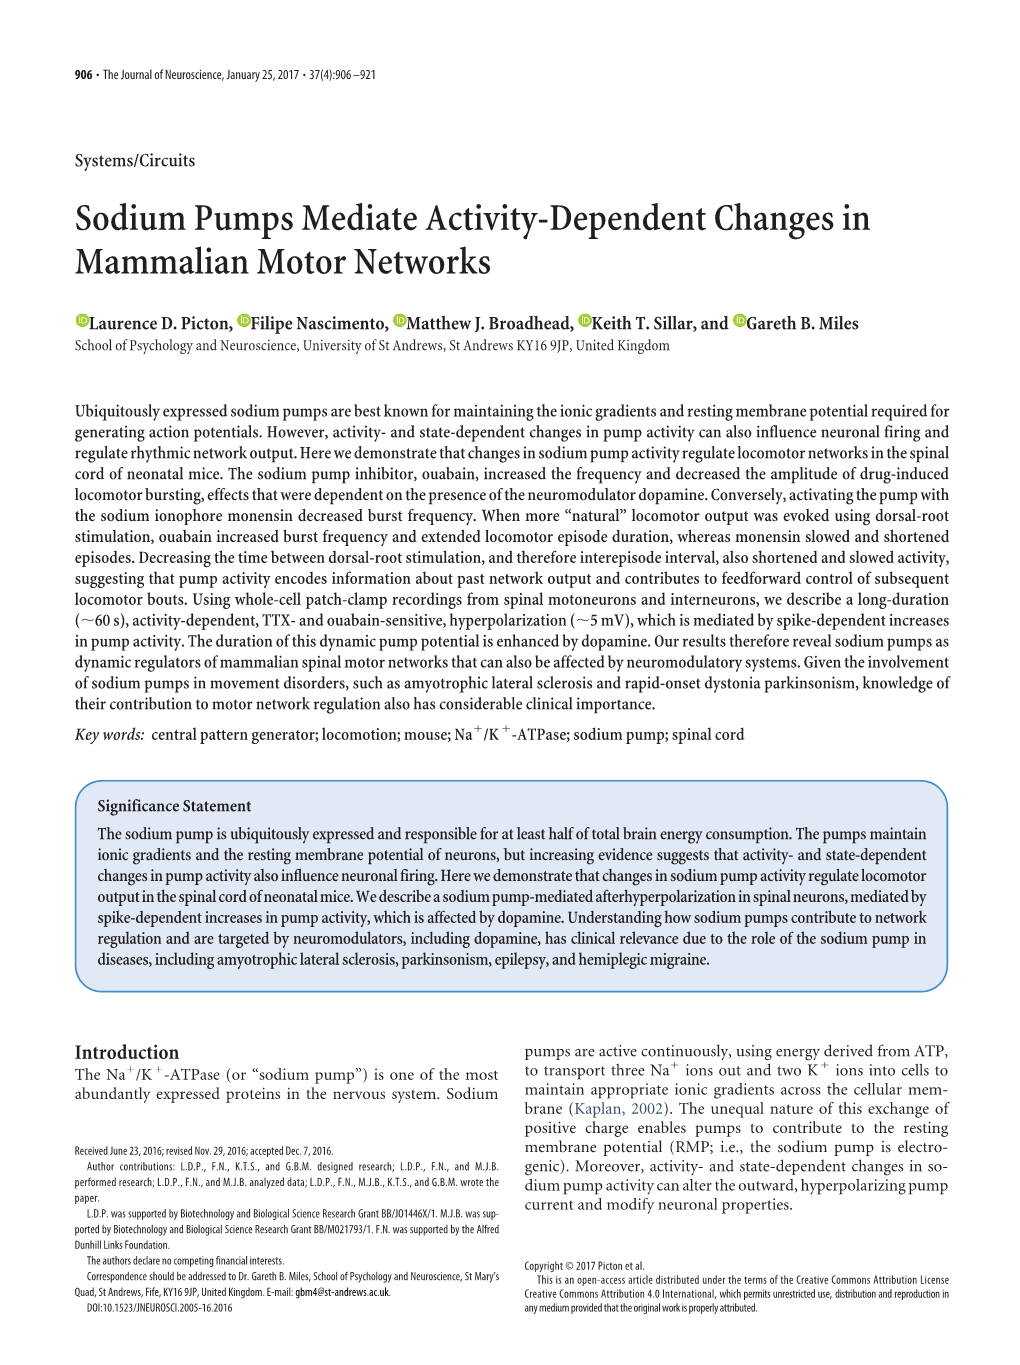 Sodium Pumps Mediate Activity-Dependent Changes in Mammalian Motor Networks